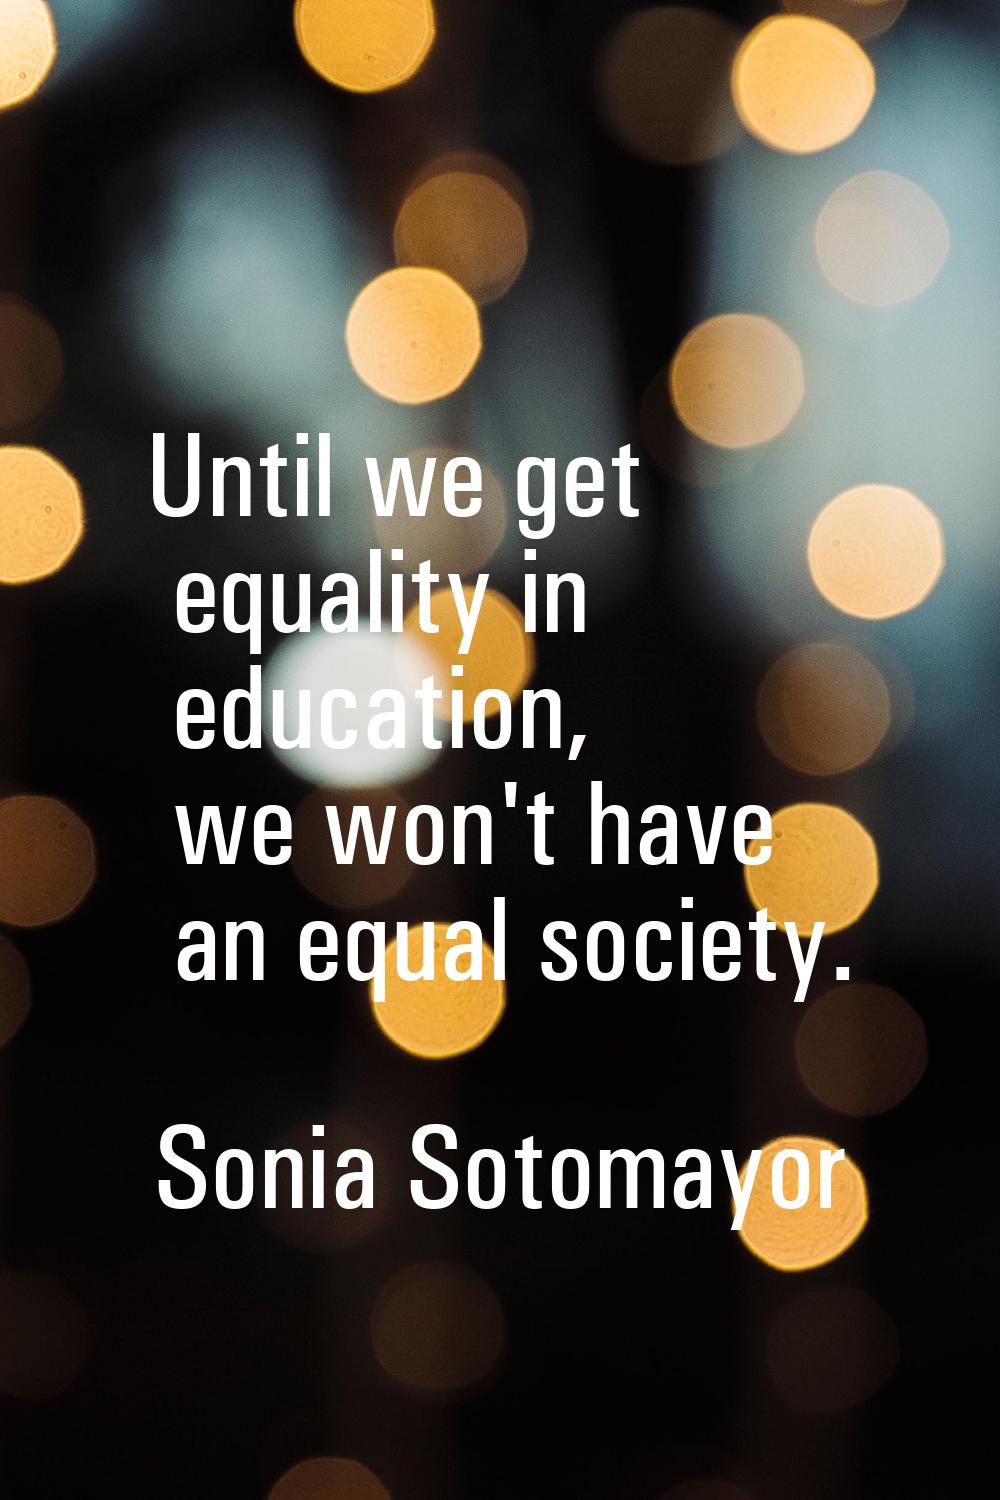 Until we get equality in education, we won't have an equal society.